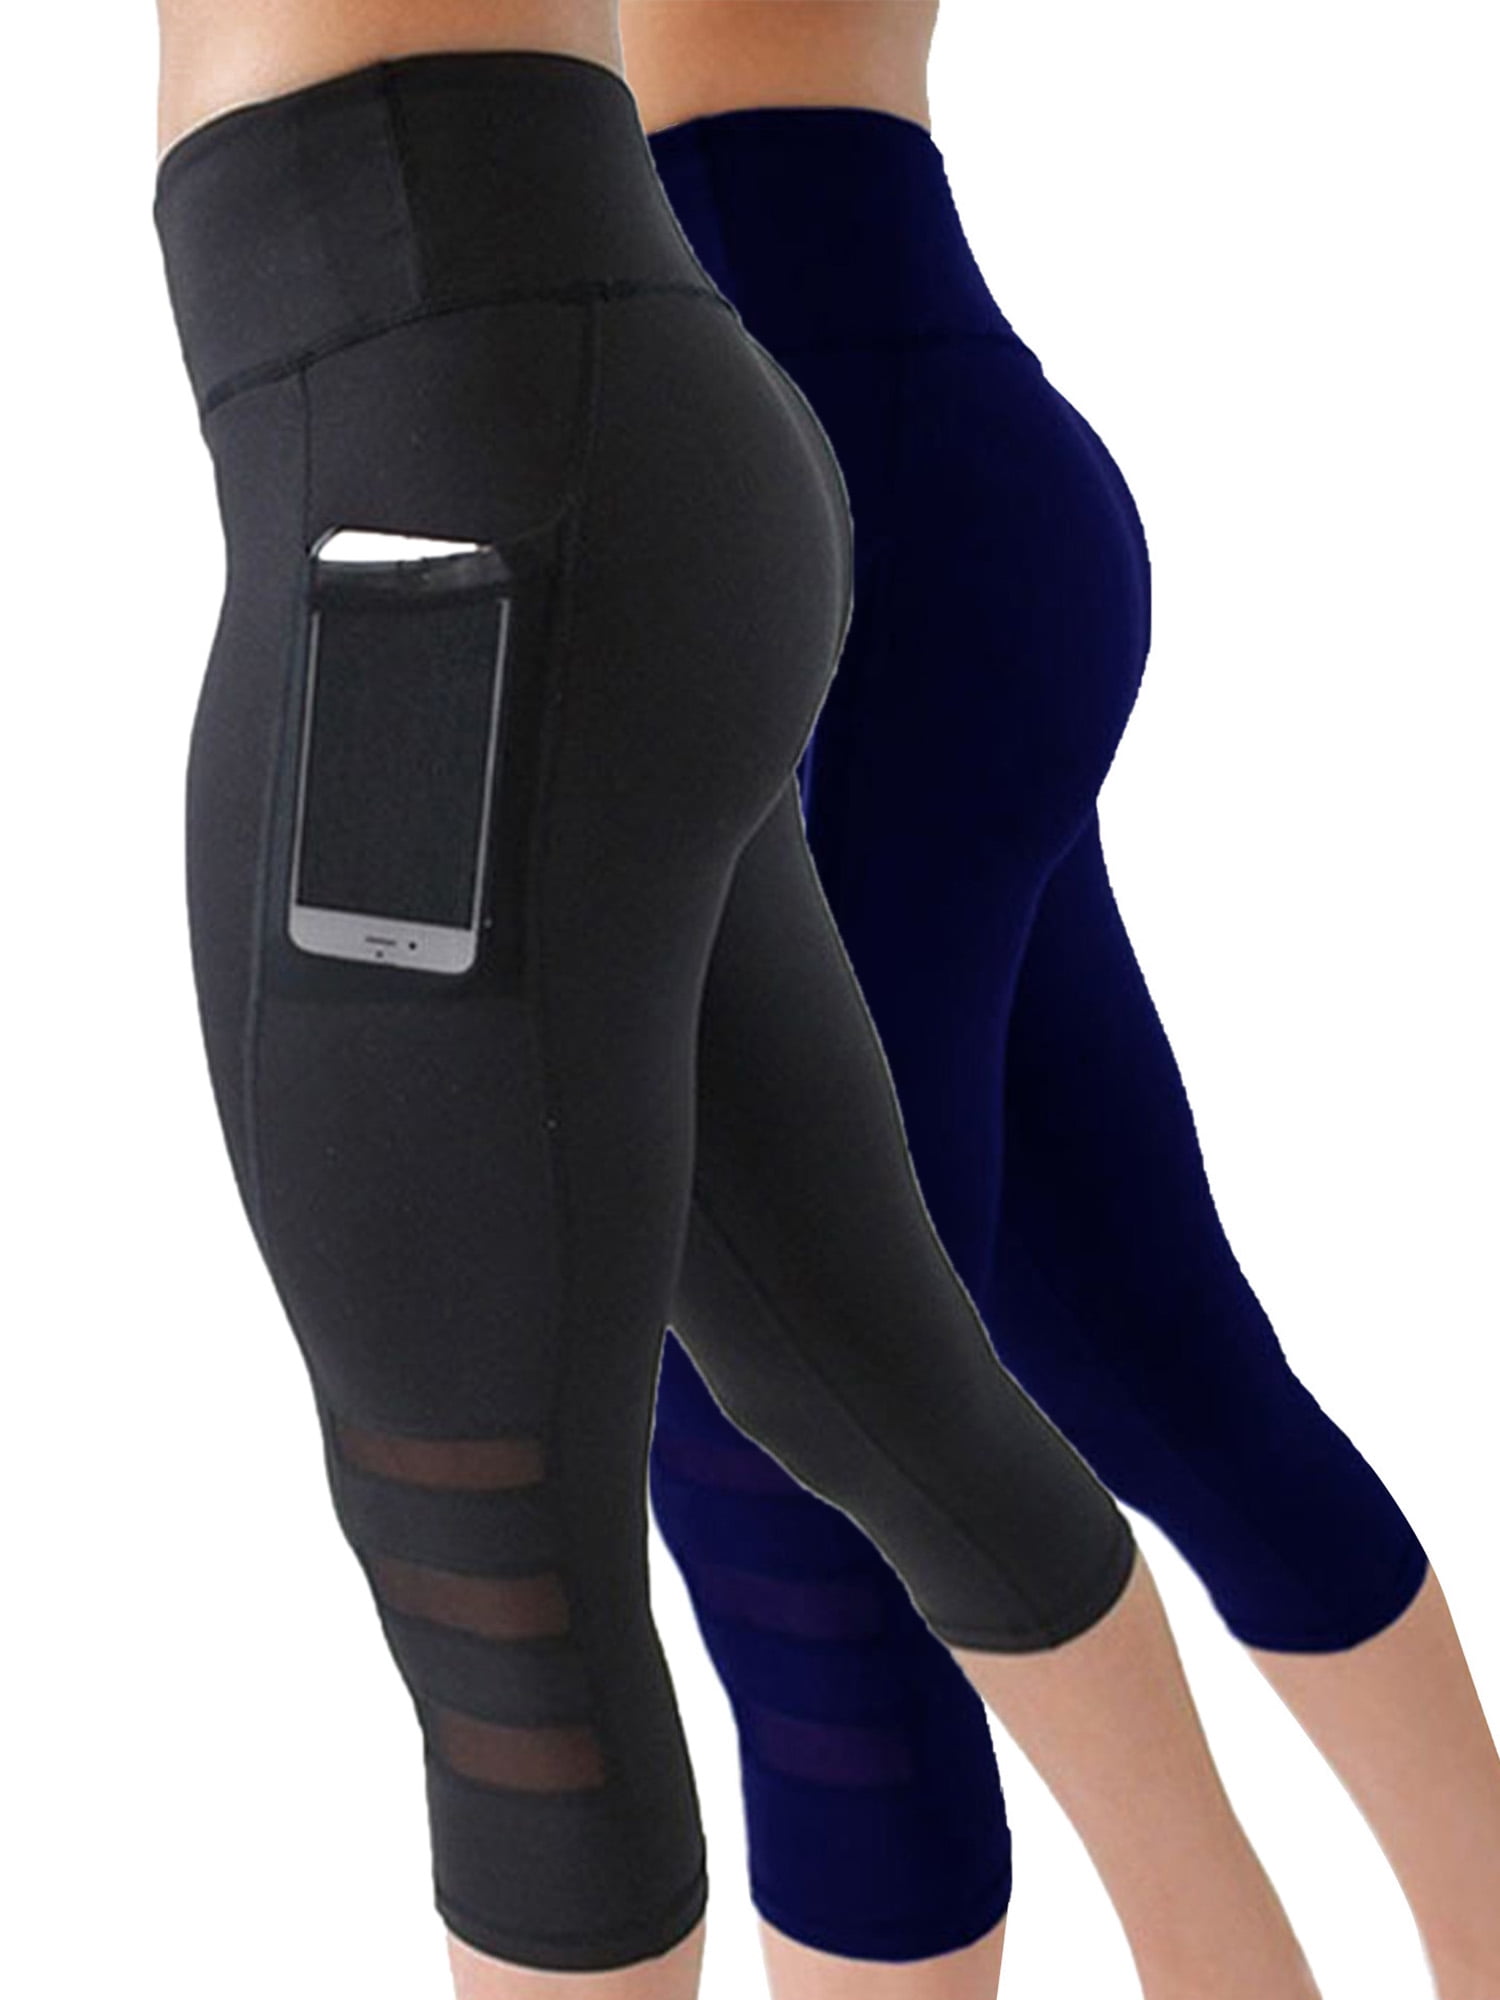 Black and Navy S MIER Womens 2 Pack High Waist Long Yoga Pants with Pockets Tummy Control Workout Legging for Running Lounge Training 7/8 Length 